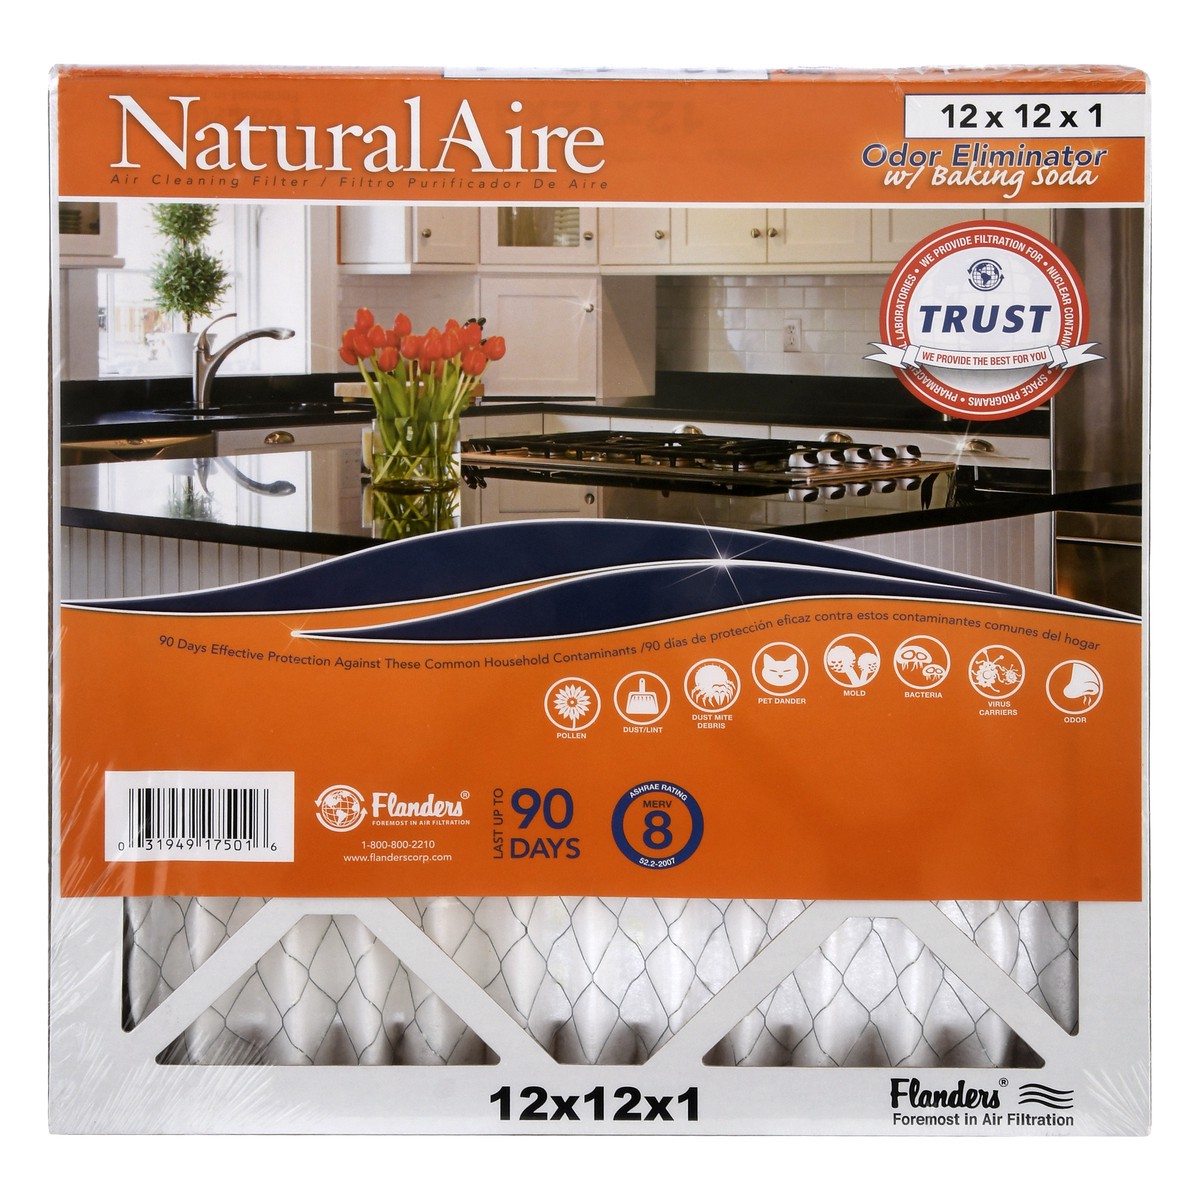 slide 11 of 11, NaturalAire 12" x 12" x 1" Air Cleaning Filter Odor Eliminator With Baking Soda, LG